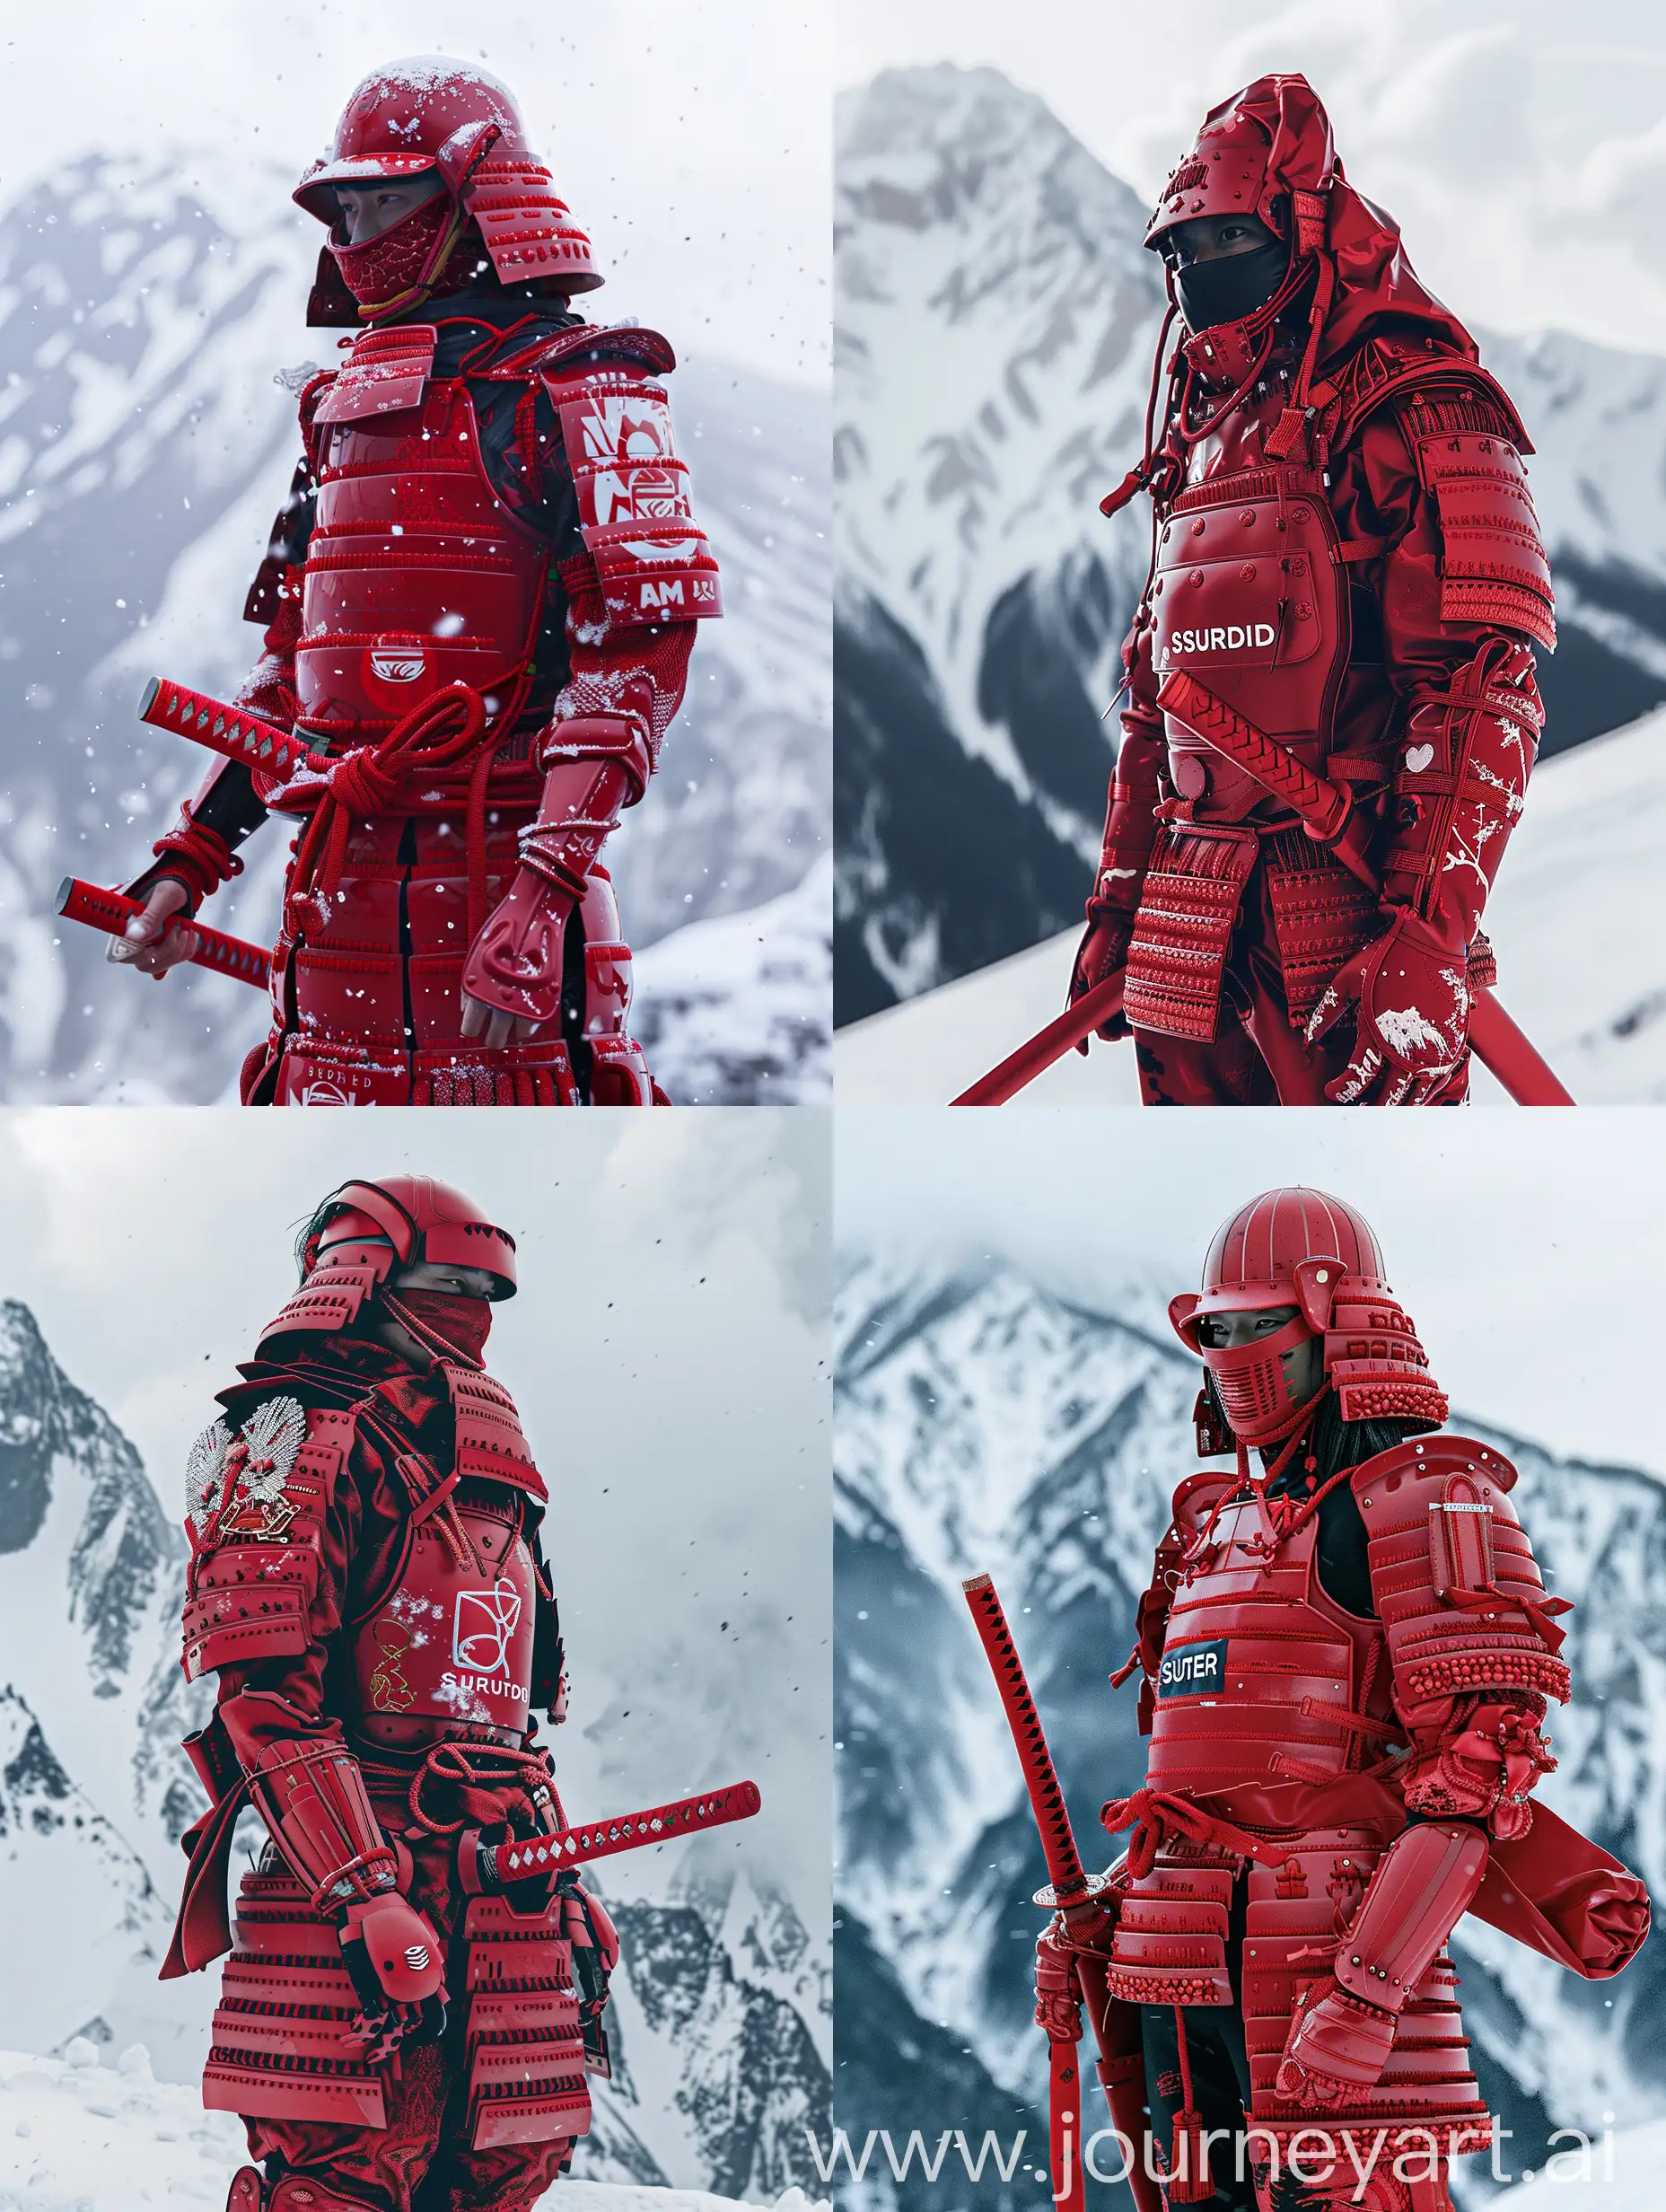 A person standing against a snowy mountainous background, wearing modernized red samurai-style armor with Supreme branding. The armor includes intricate detailing and protective gear, and the person holds a red sheathed sword.